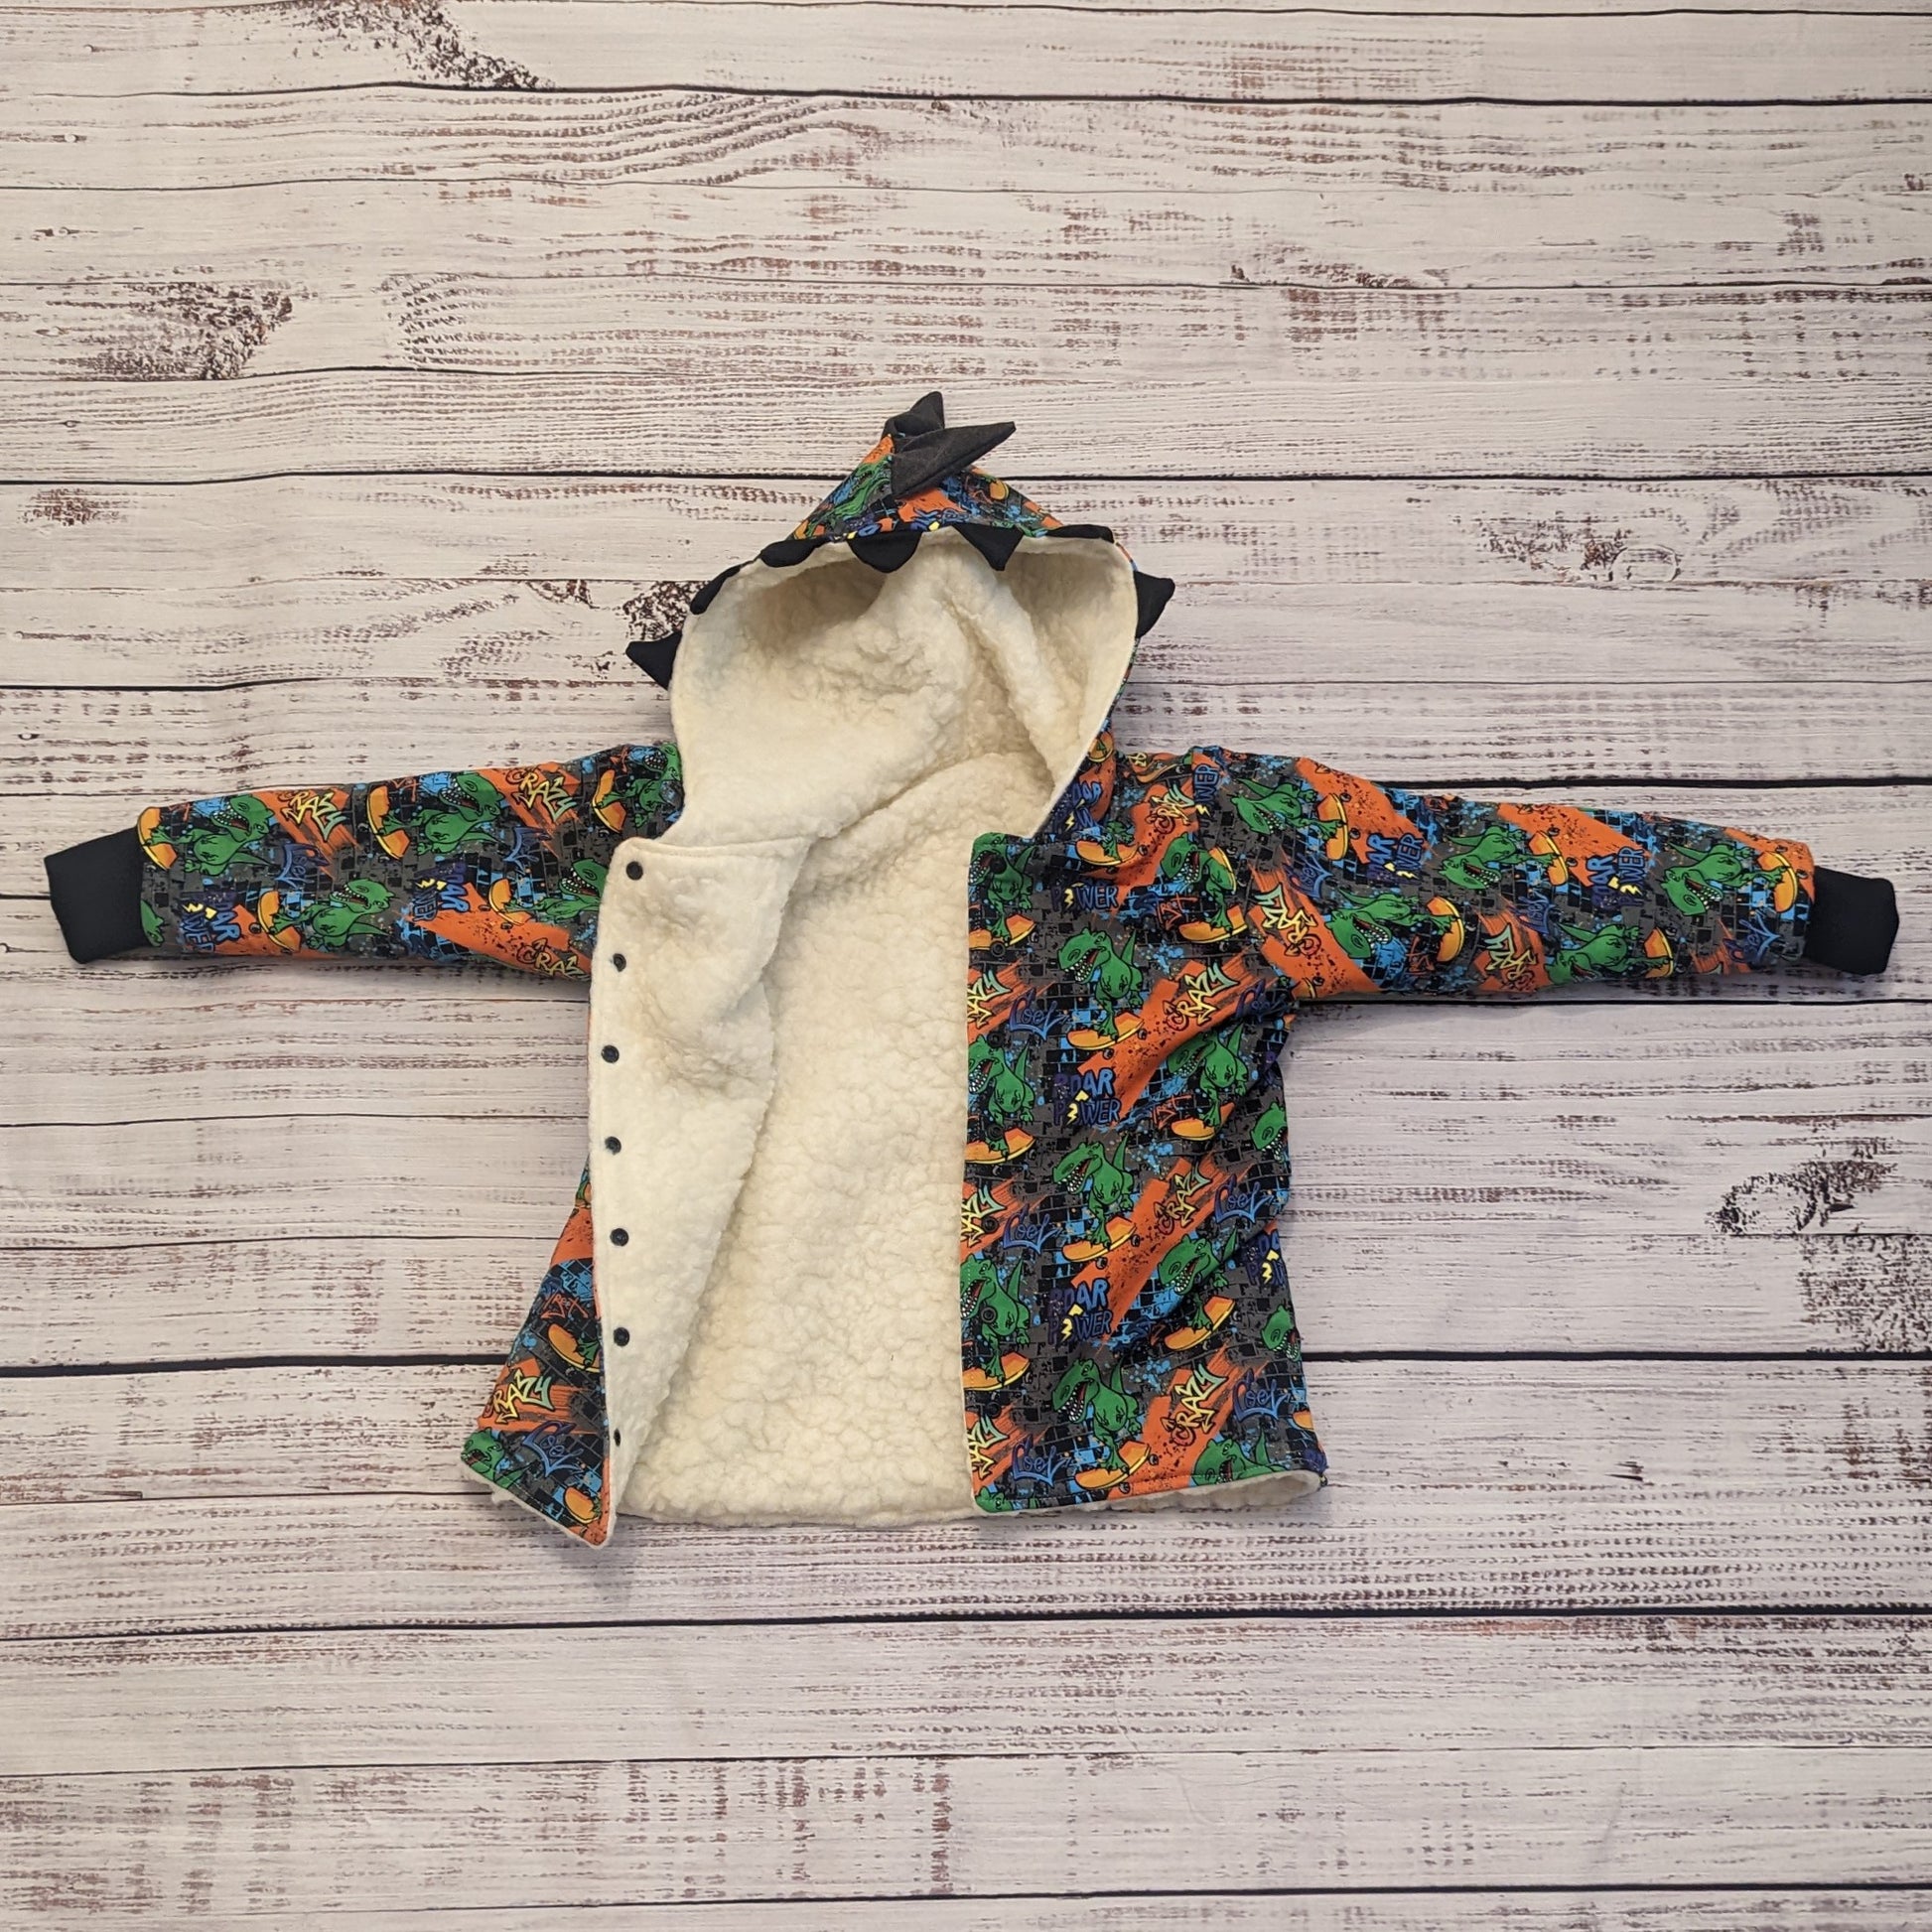 The ferociously cool street Dino reversible coat, shown with dinosaur teeth and spines for added fun. Handmade using street dino cotton French terry, black cotton ribbing and sherpa fur. With front popper entry open showing the warm sherpa fur inner.